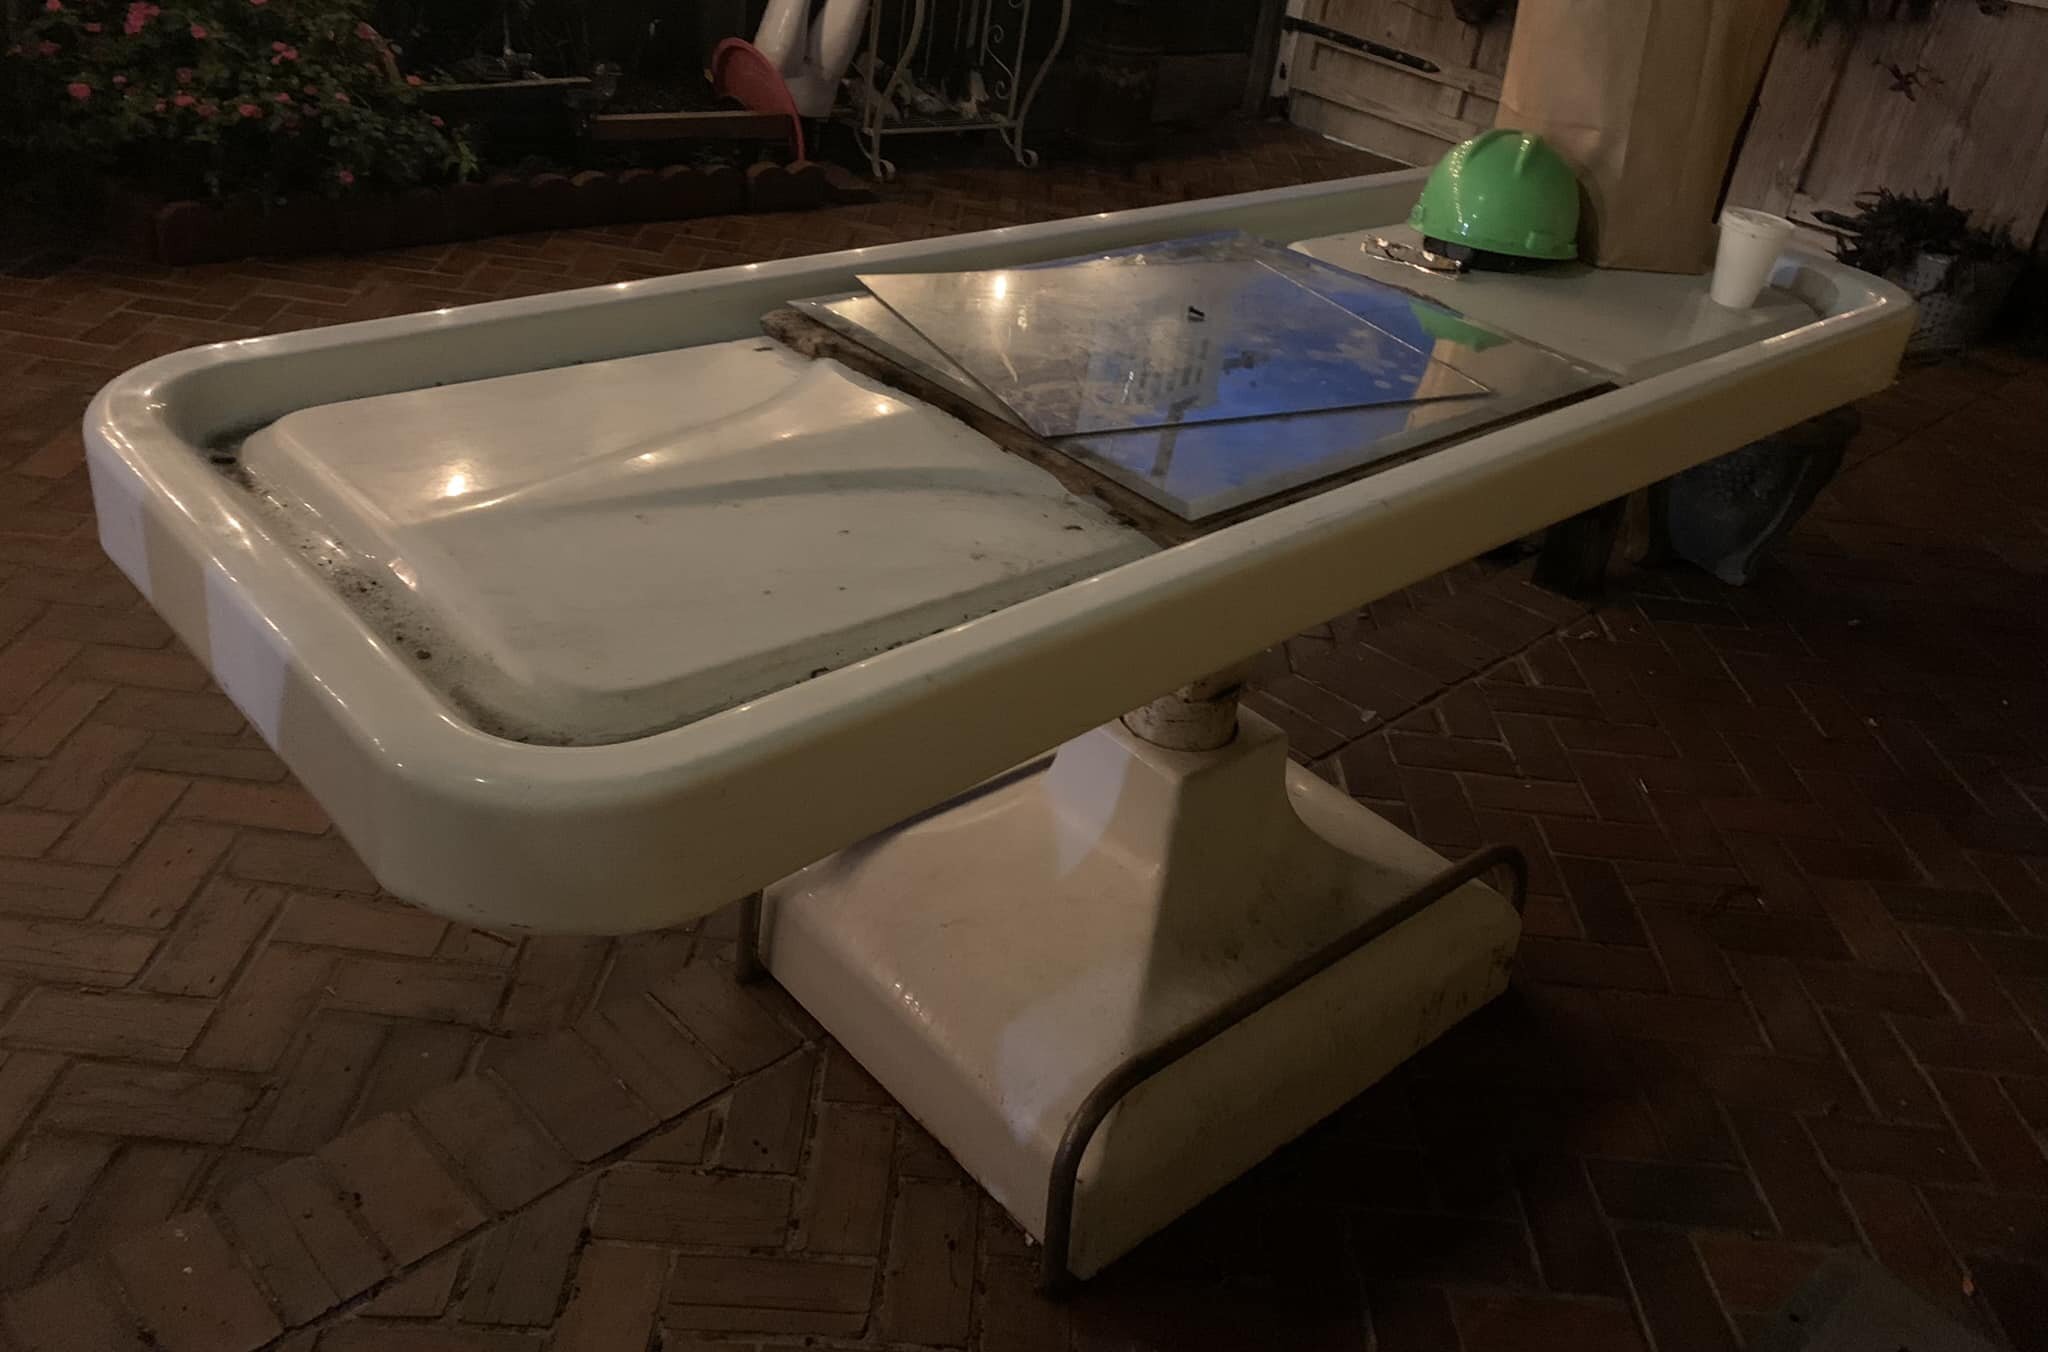 As seen in &ldquo;Interview with the Vampire&rdquo;, and currently doubling as a place for groceries: the embalming table in my friend&rsquo;s courtyard,